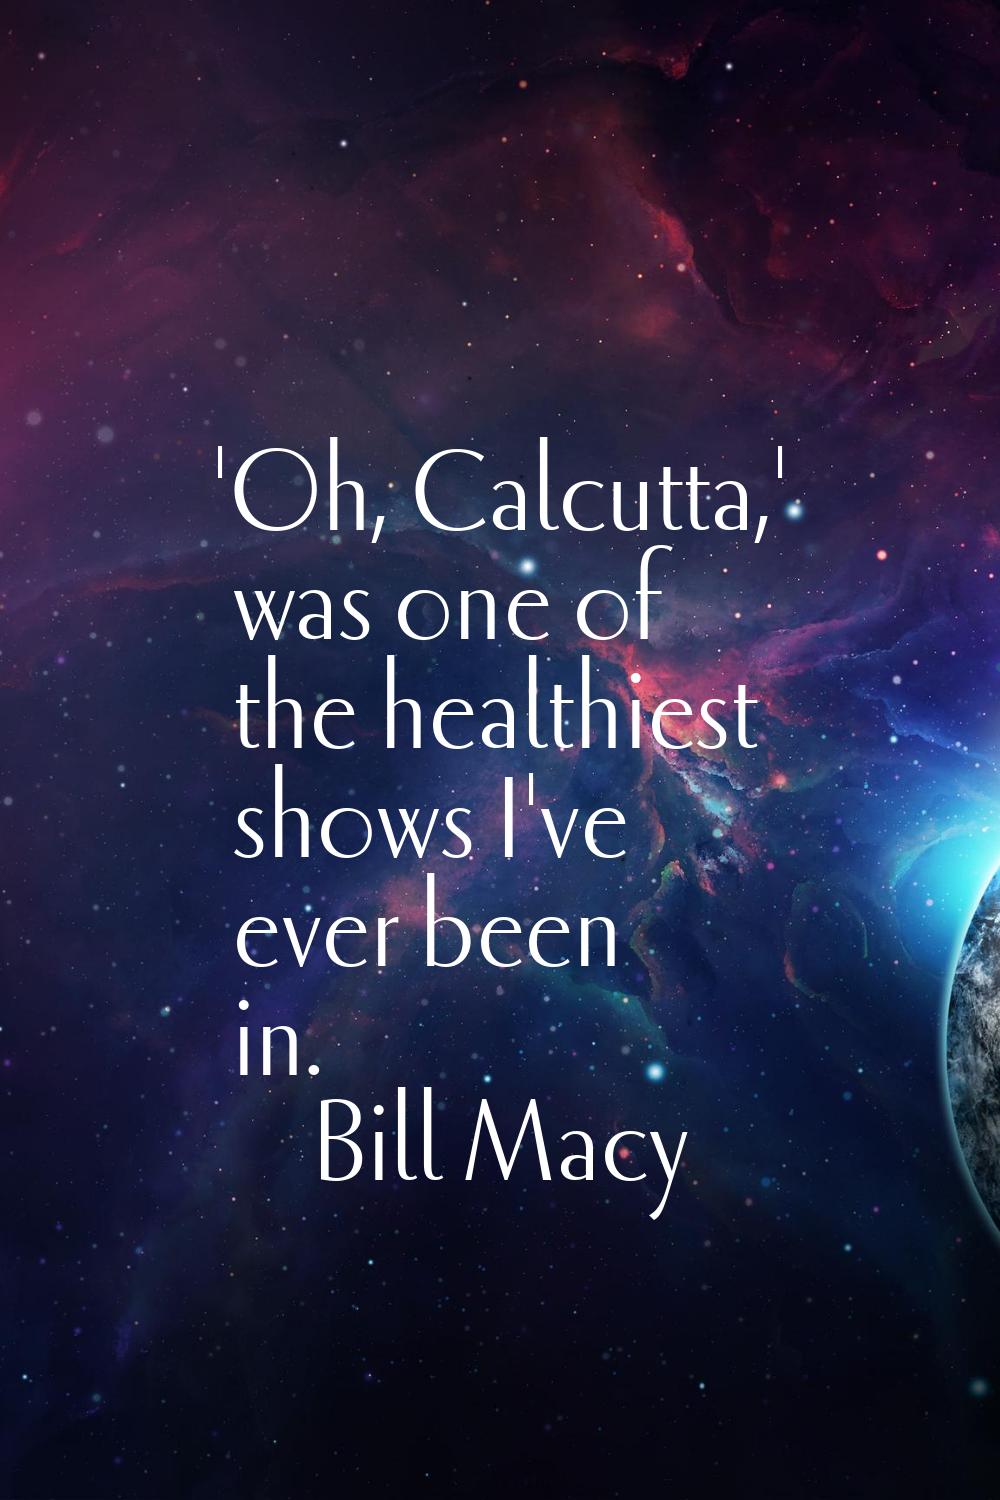 'Oh, Calcutta,' was one of the healthiest shows I've ever been in.